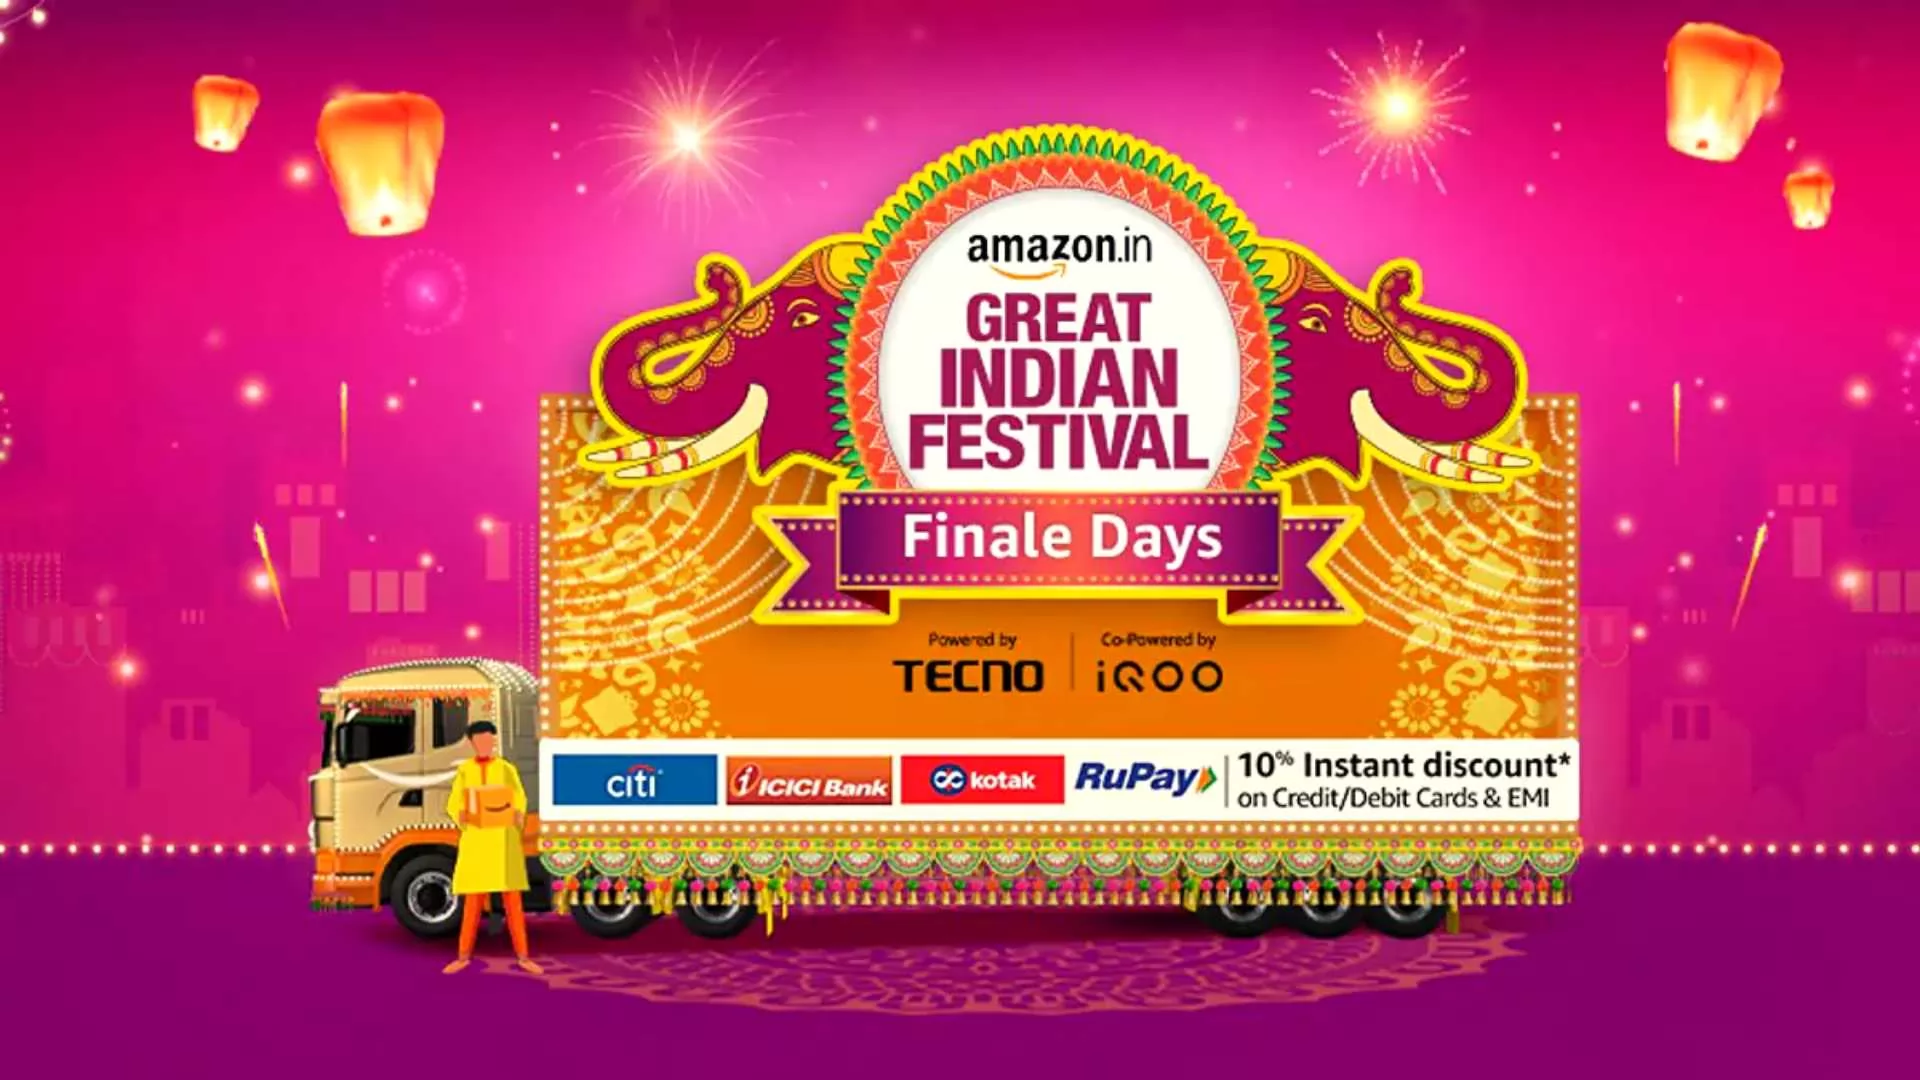 Amazon Great Indian Festival Finale Days